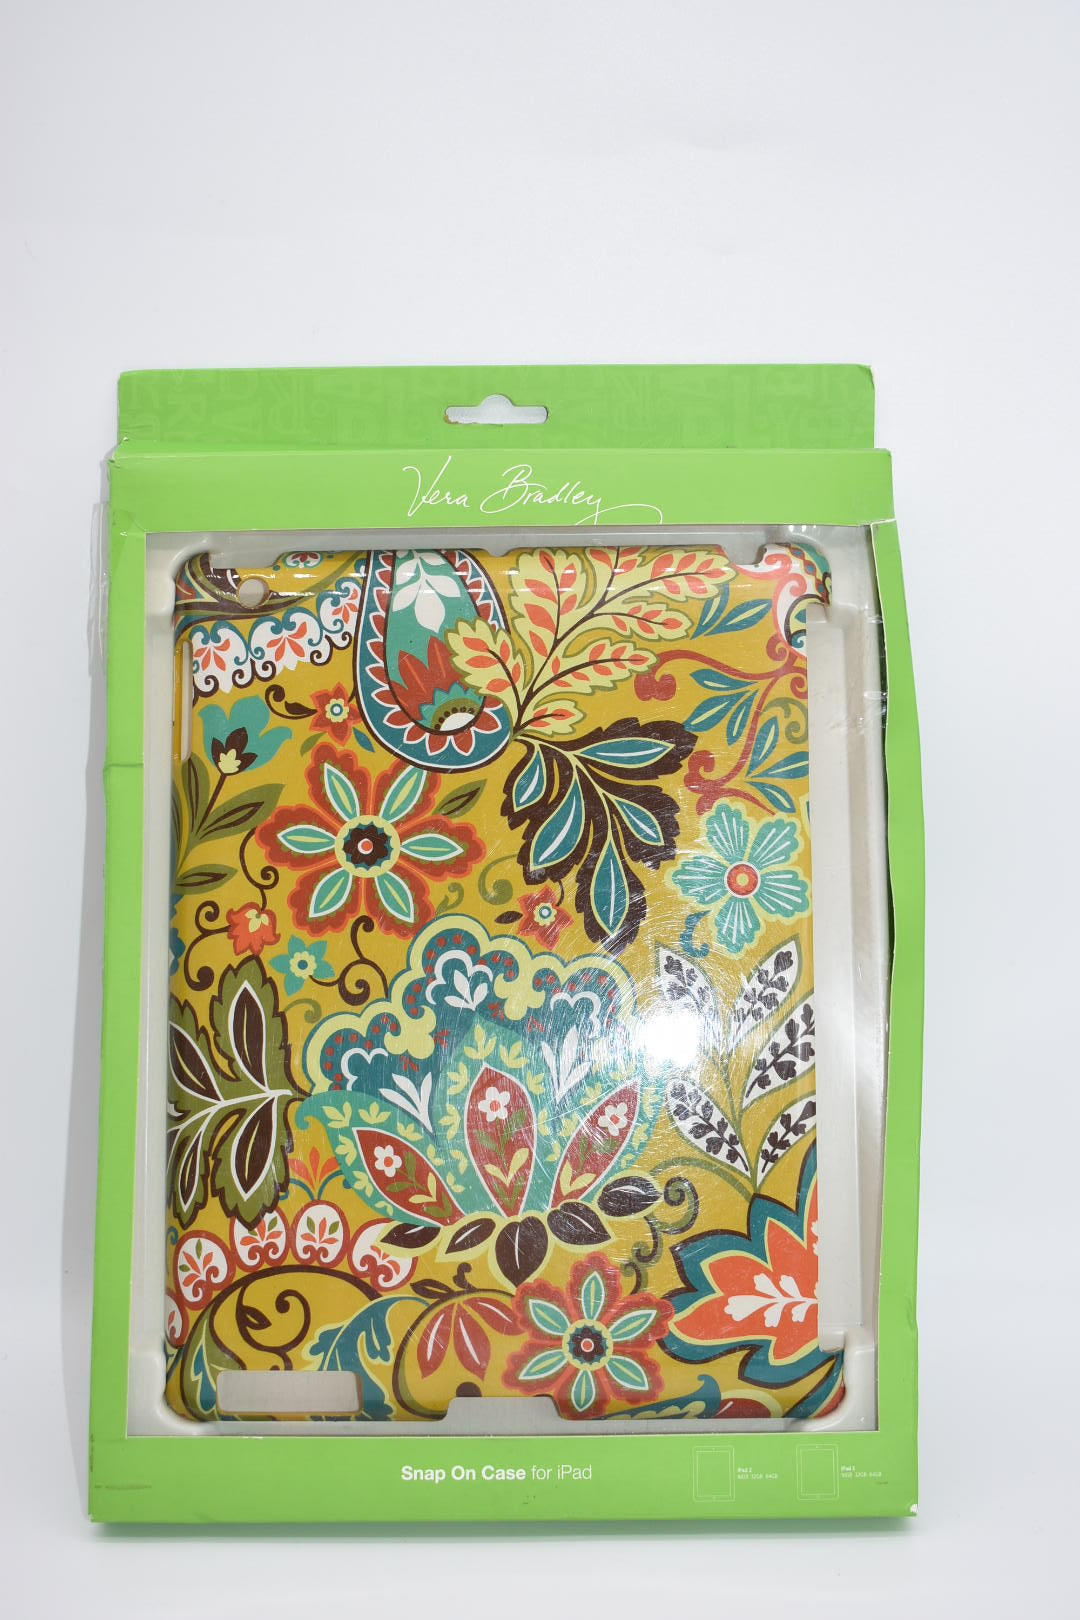 Vera Bradley Snap-On Case for iPad 2/ iPad 3 in "Provencal" Pattern